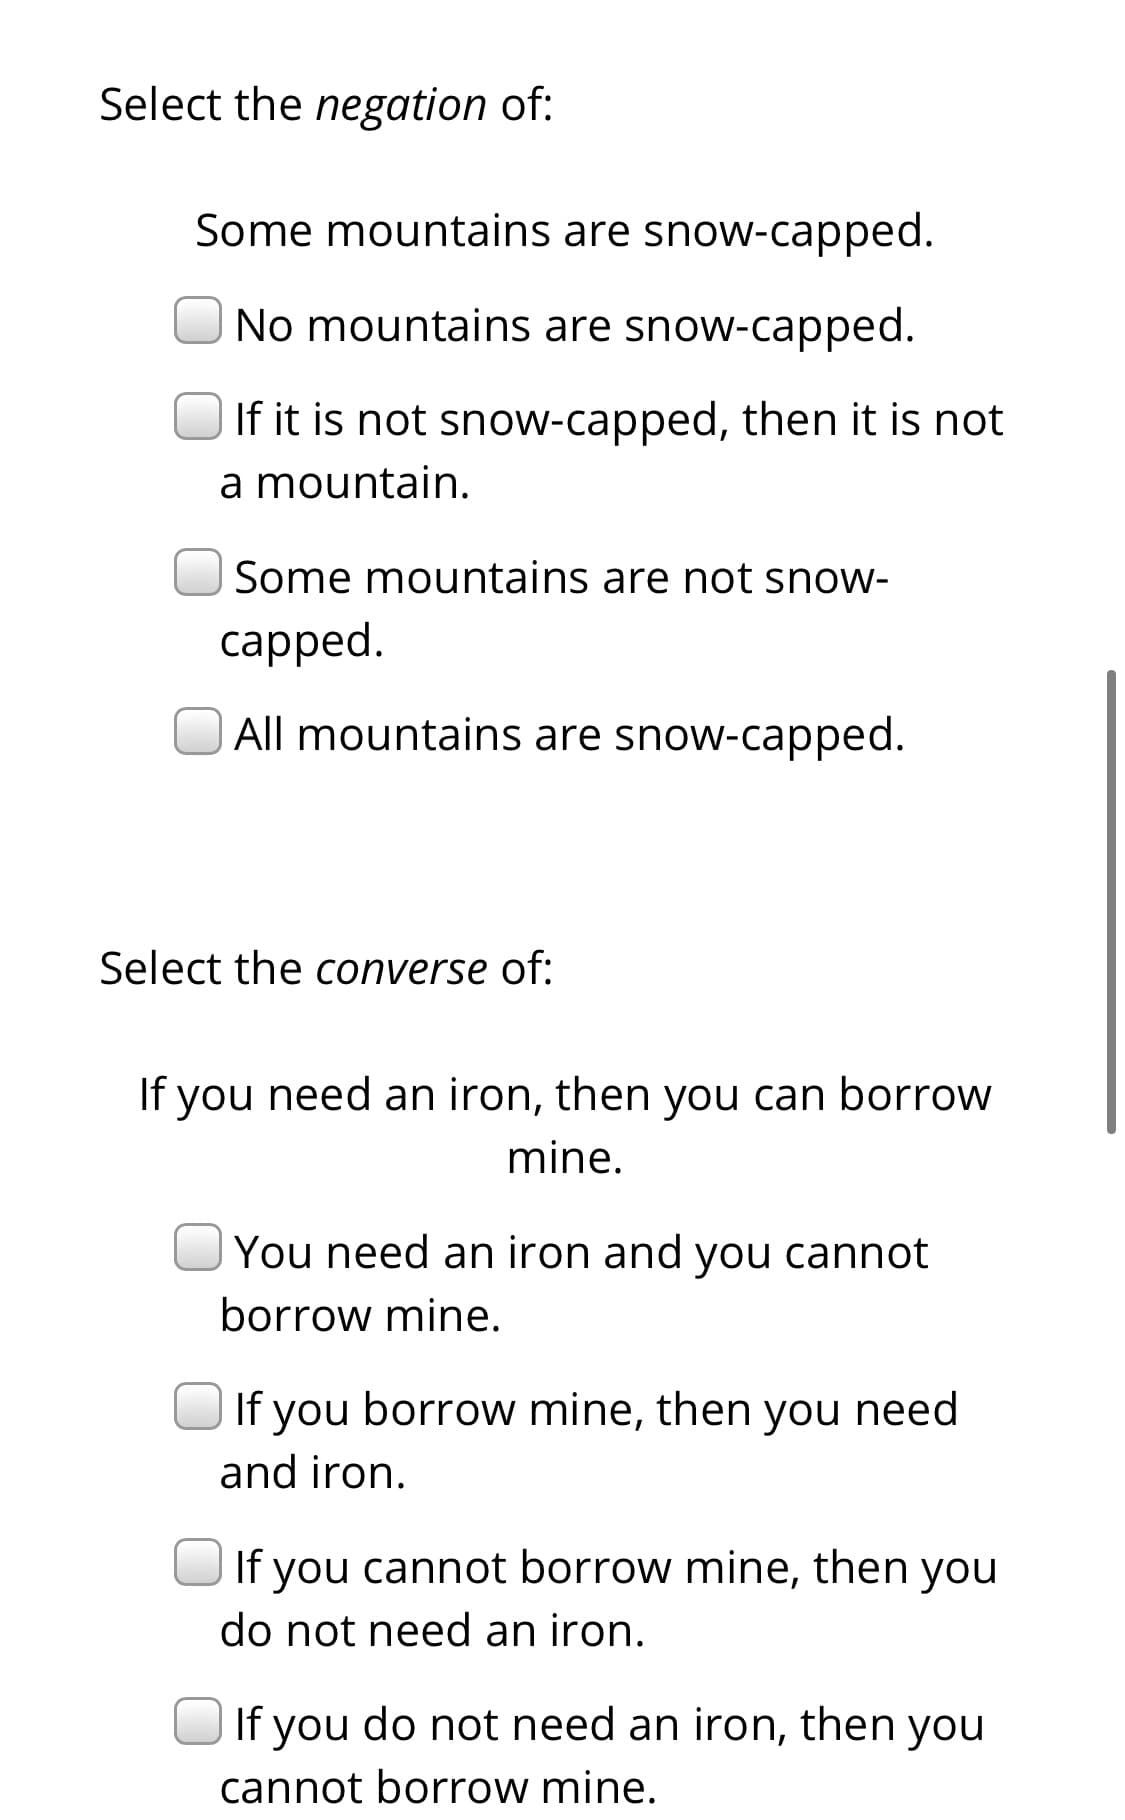 Select the negation of:
Some mountains are snow-capped.
No mountains are snow-capped.
If it is not snow-capped, then it is not
a mountain.
Some mountains are not snow-
сapped.
All mountains are snow-capped.
Select the converse of:
If you need an iron, then you can borrow
mine.
You need an iron and you cannot
borrow mine.
If you borrow mine, then you need
and iron.
If you cannot borrow mine, then you
do not need an iron.
If you do not need an iron, then you
cannot borrow mine.
